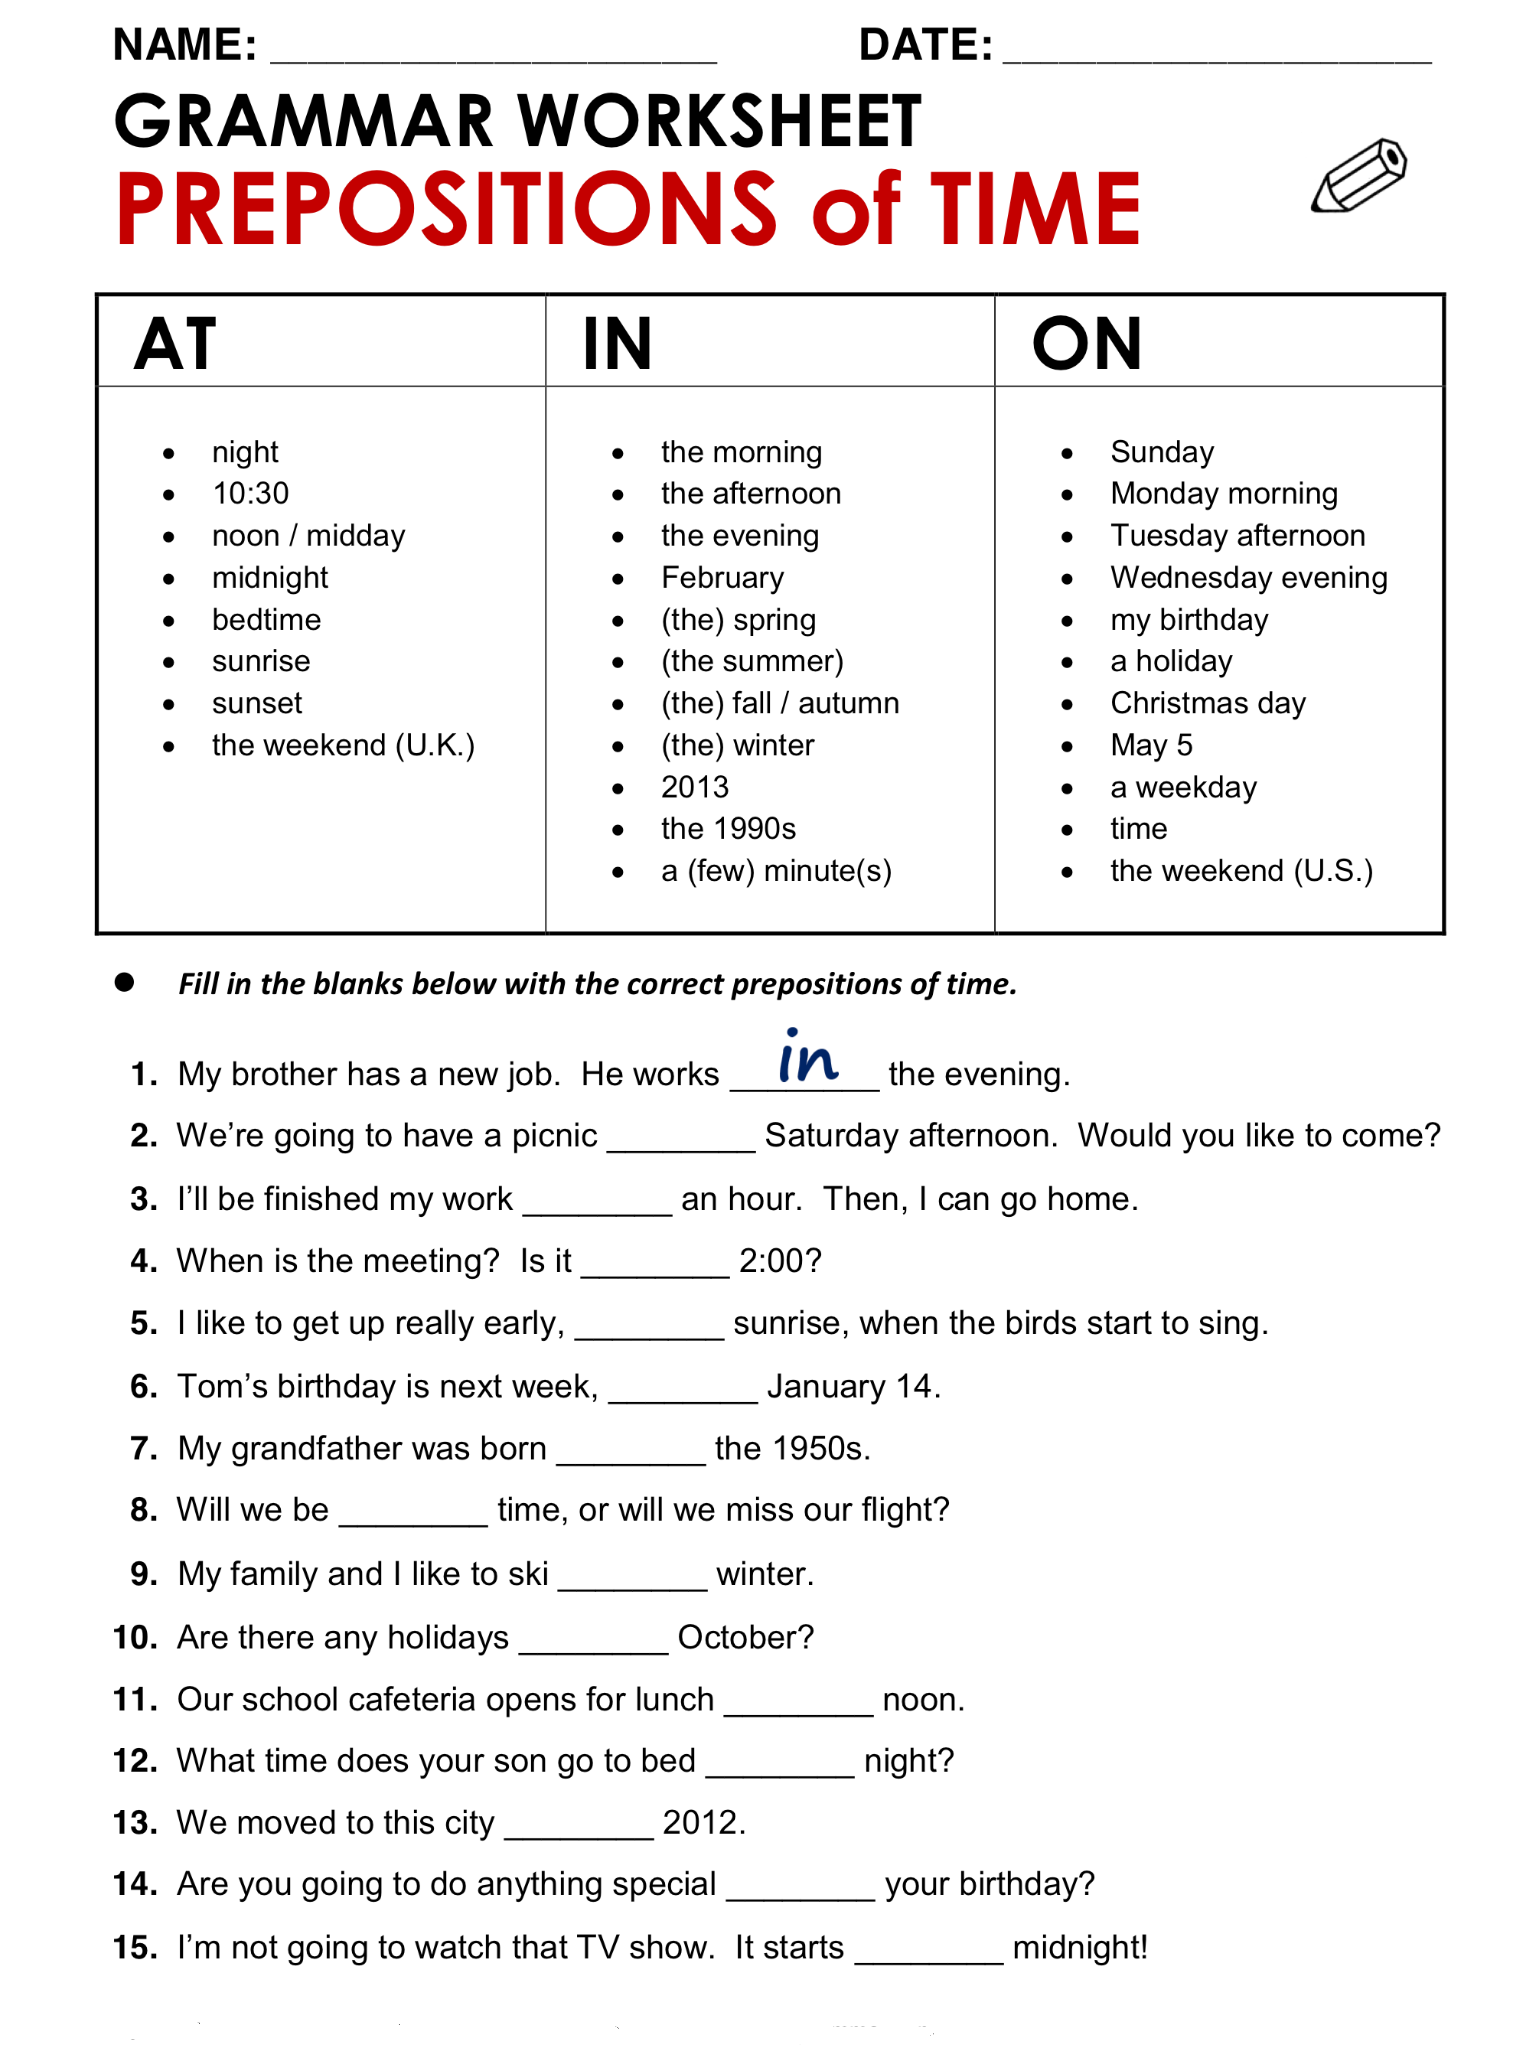 Prepositions elementary. In on at в английском языке Worksheets. In on at time в английском языке Worksheets. Предлоги at in on Worksheets. On in at в английском Worksheets.